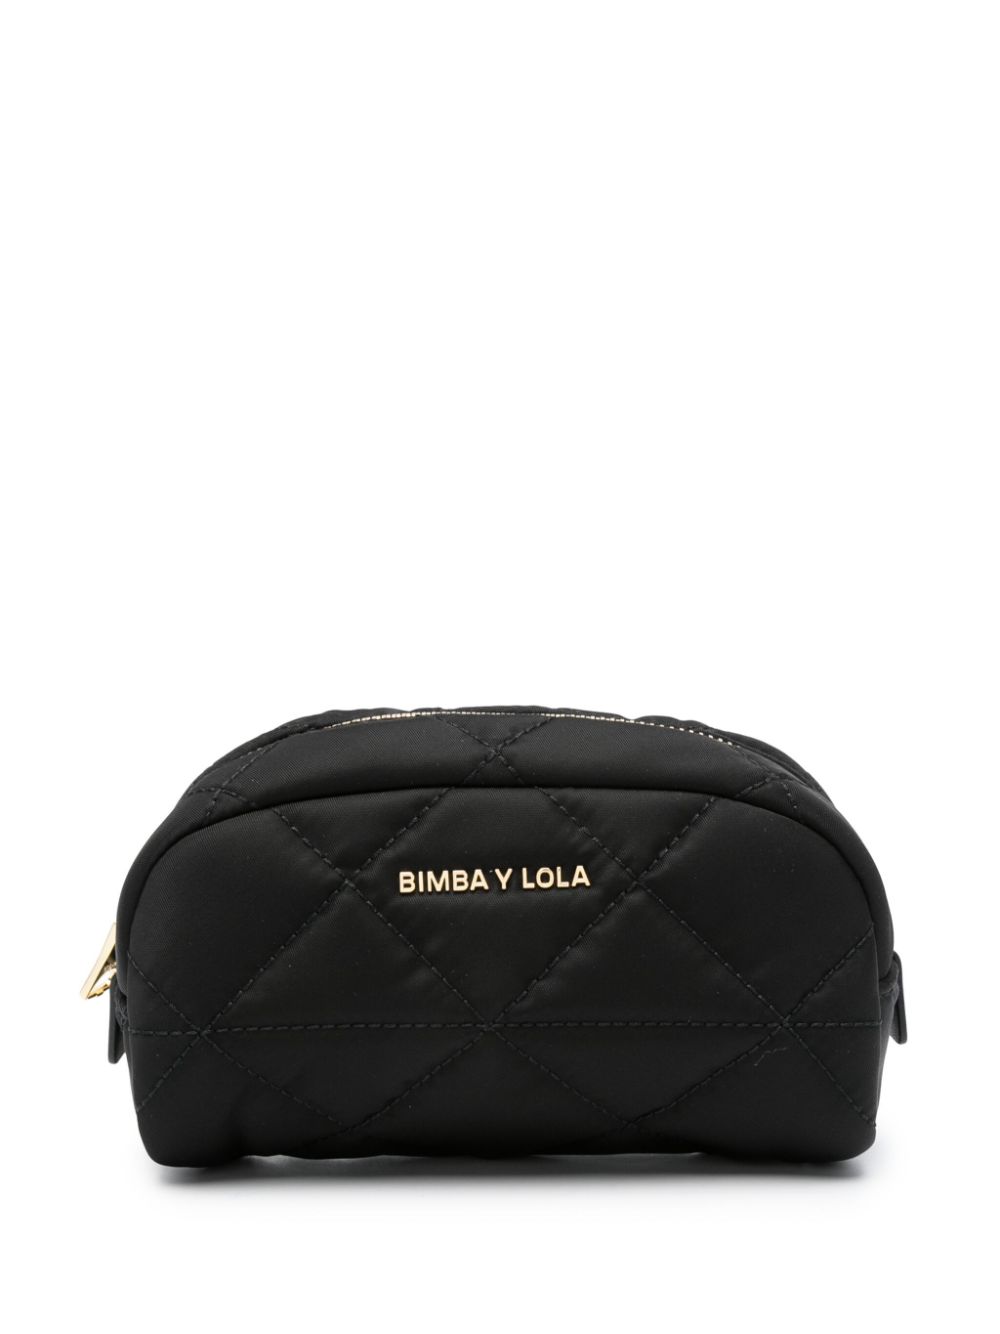 Bimba y Lola logo-lettering quilted make-up bag